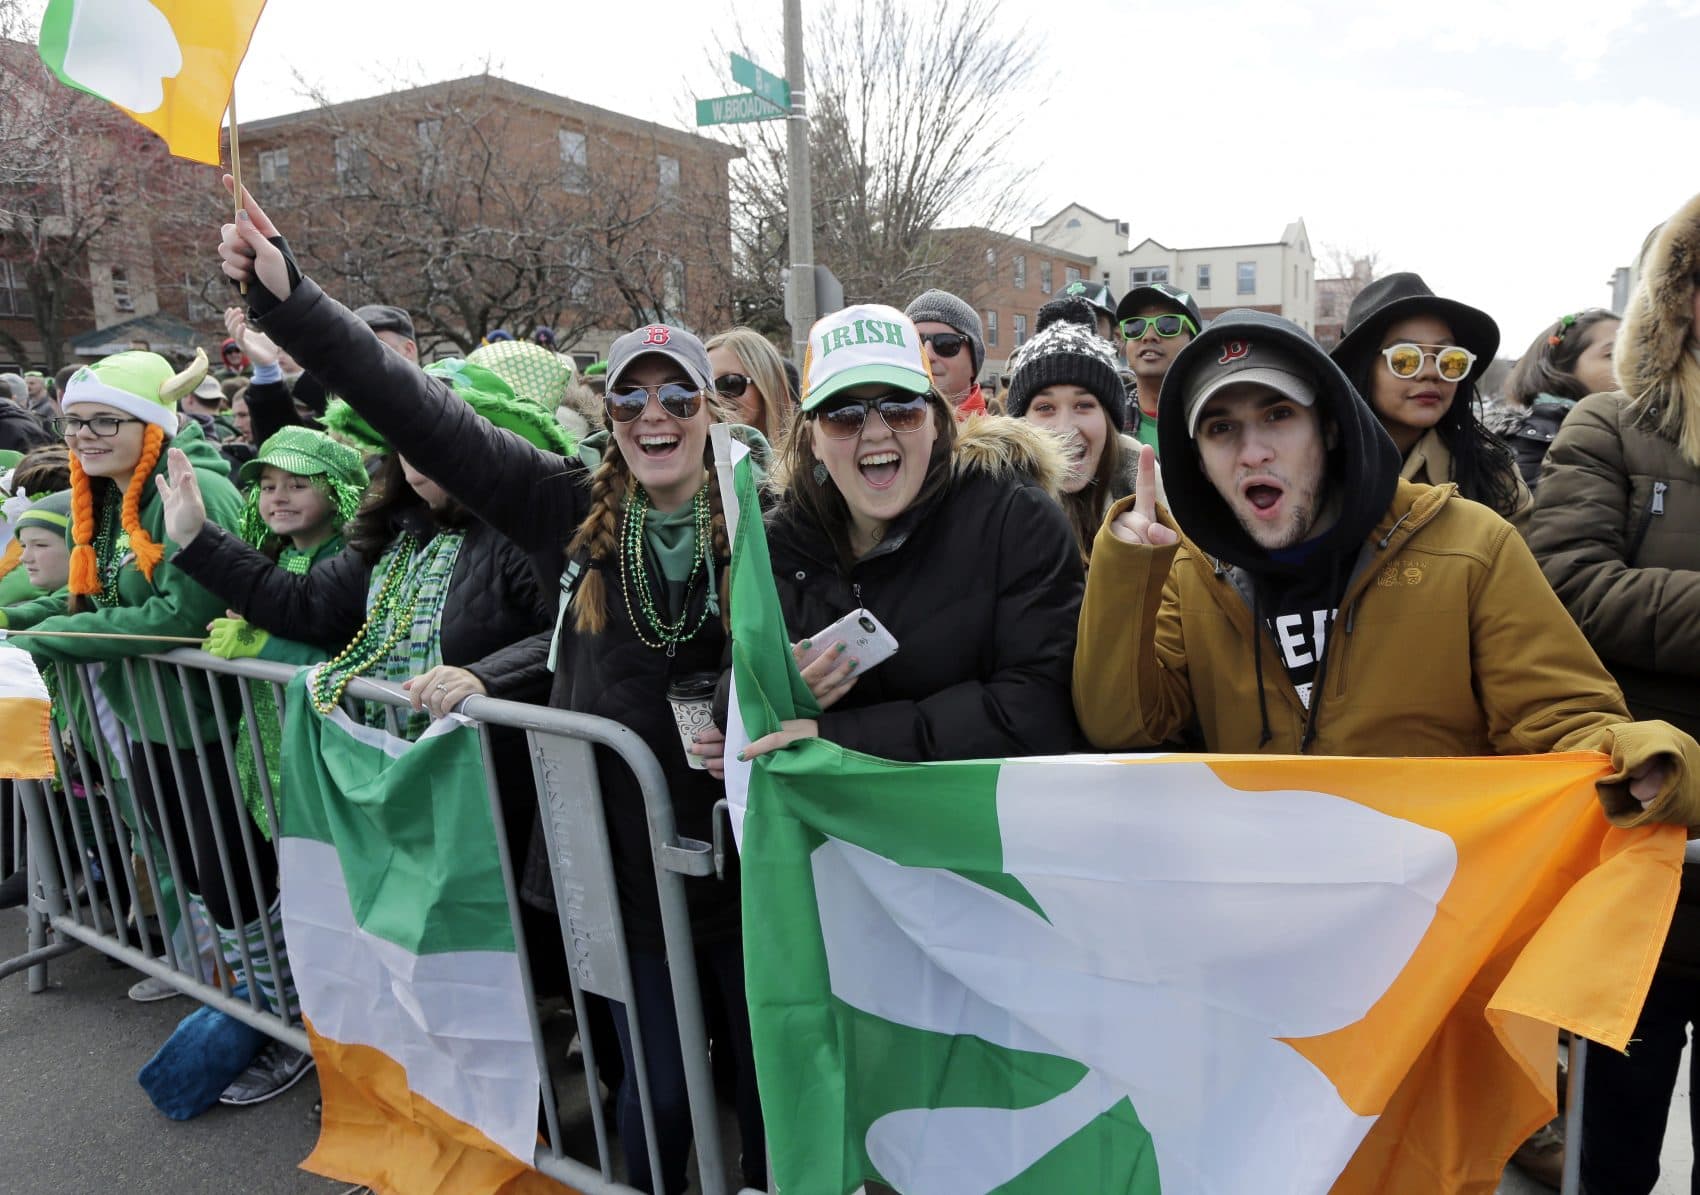 Spectators cheer as they watch the annual St. Patrick's Day Parade in Boston in 2016. (Steven Senne/AP)